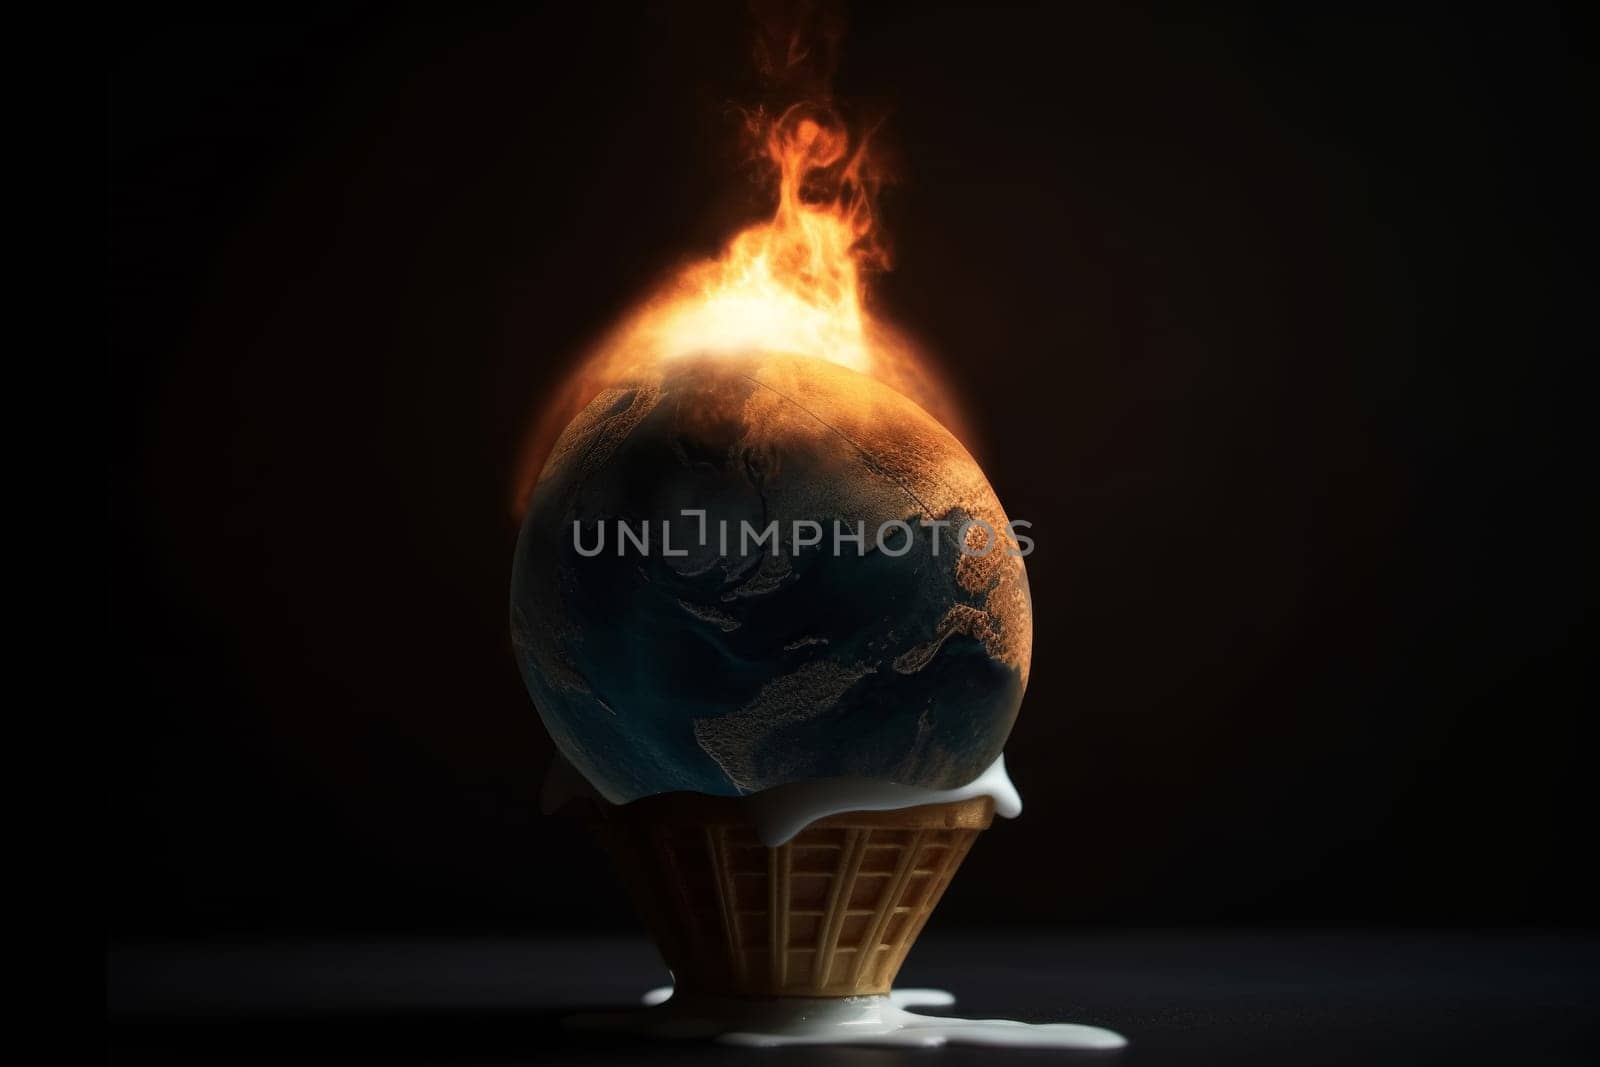 A provocative concept image showcasing Earth as an ice cream scoop, aflame on top, melting over a dark background, symbolizing climate change